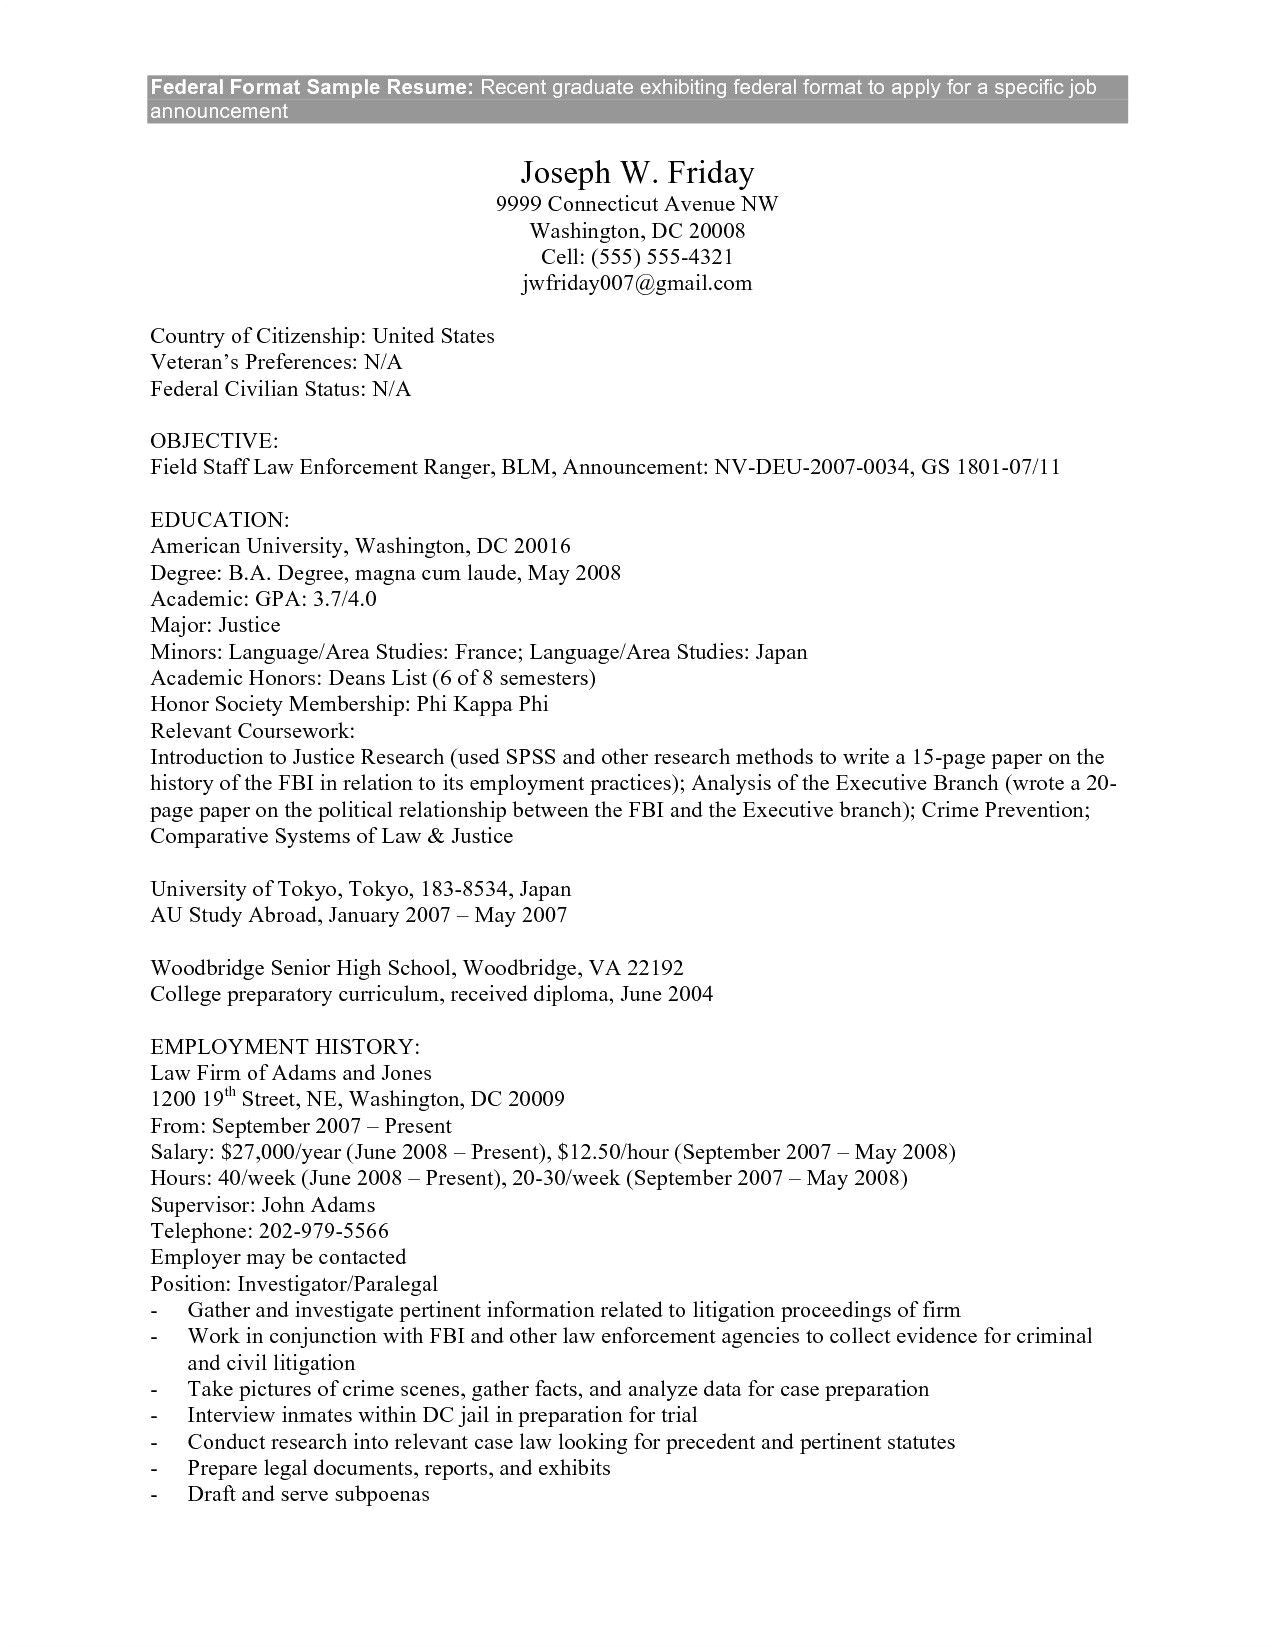 Sample Resume Xls format Sample Resume Xls format Resume Tips 13 Perfect Sample